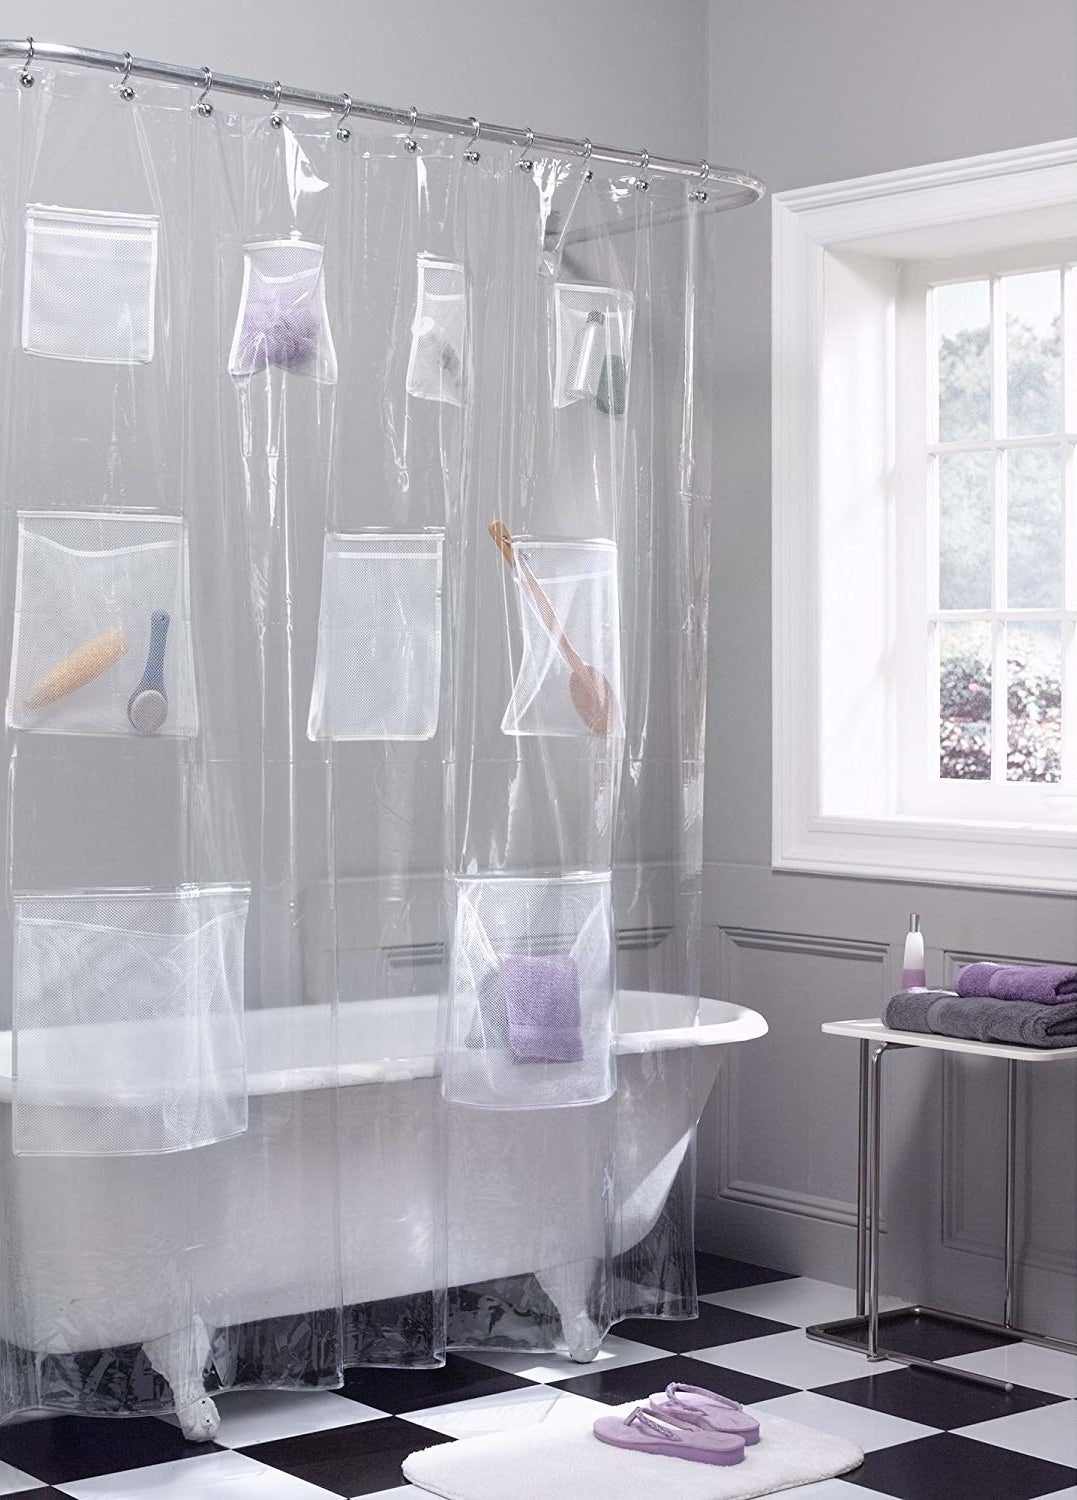 The curtain, which has two big pockets in the bottom row, three medium pockets in the middle, and four small pockets on the top; all pockets face inside the shower